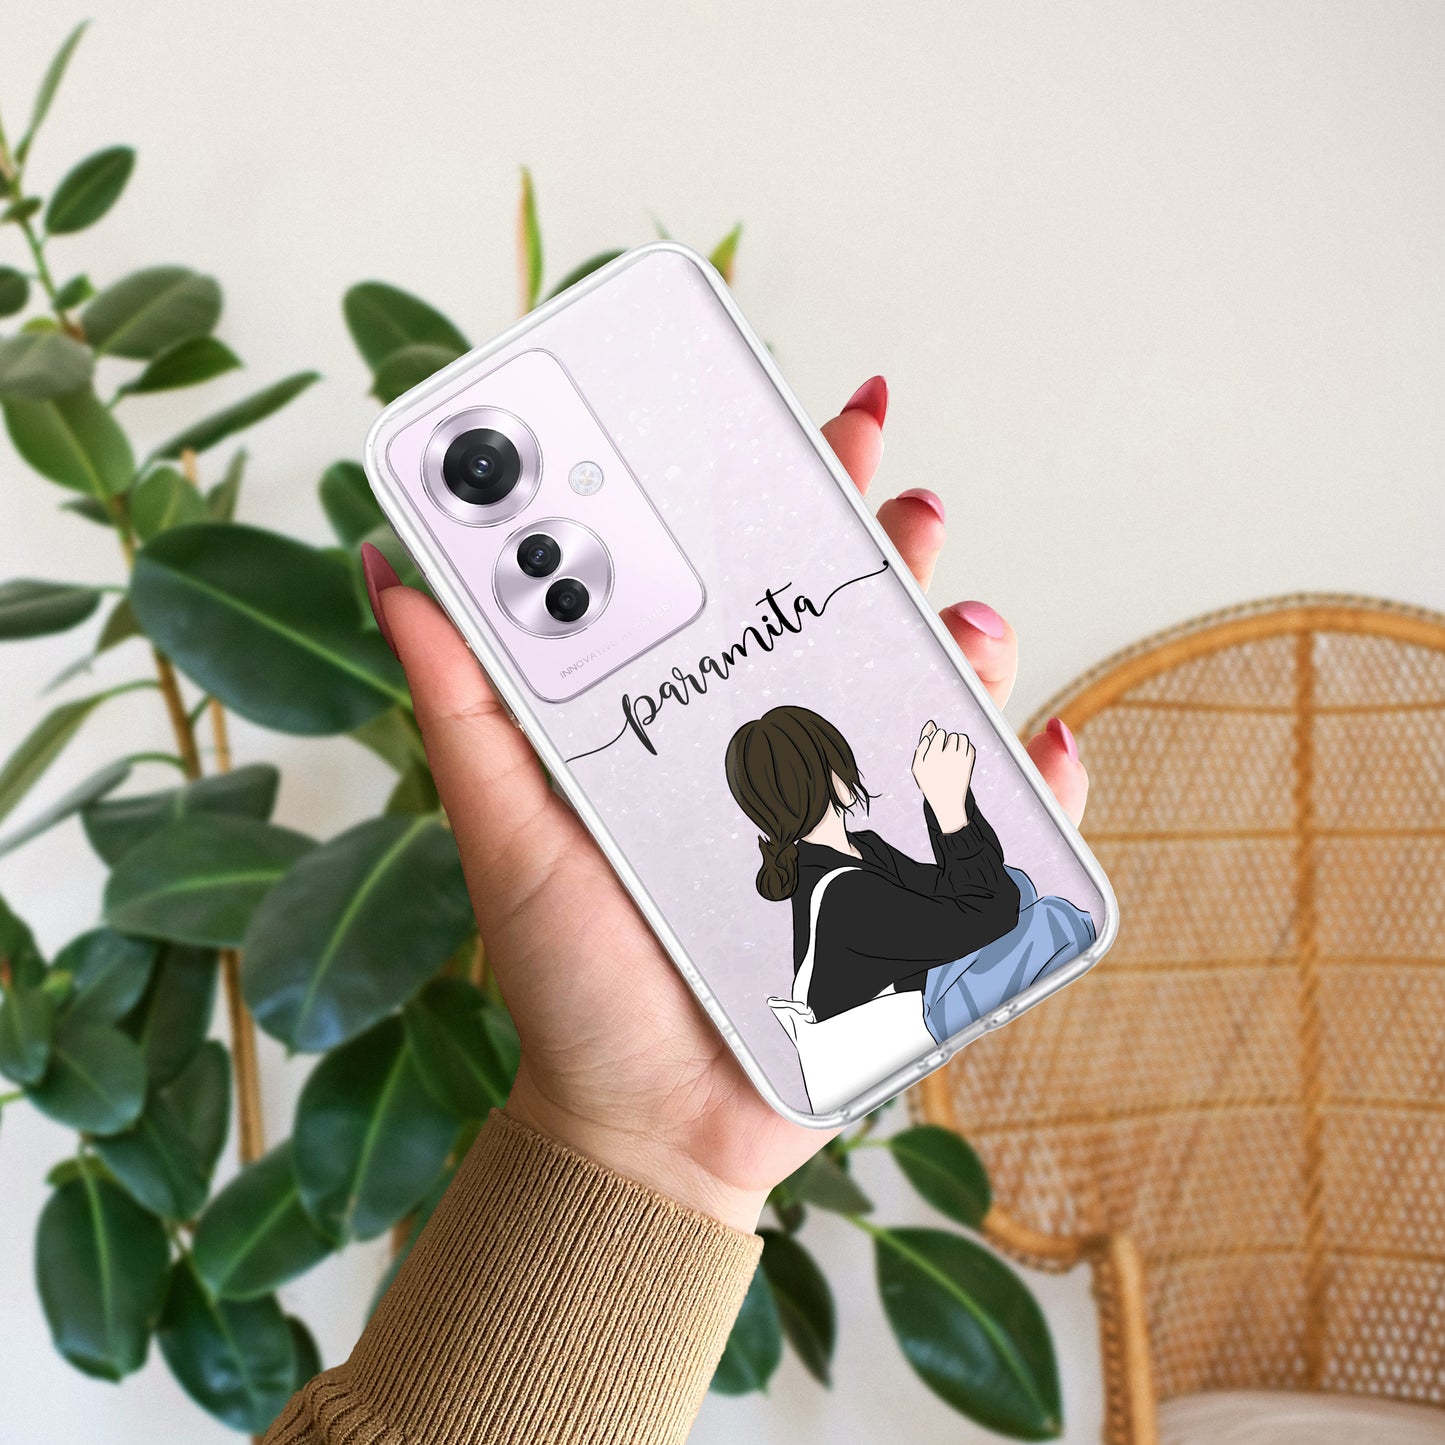 Relax Mood Customize Transparent Silicon Case For Oppo